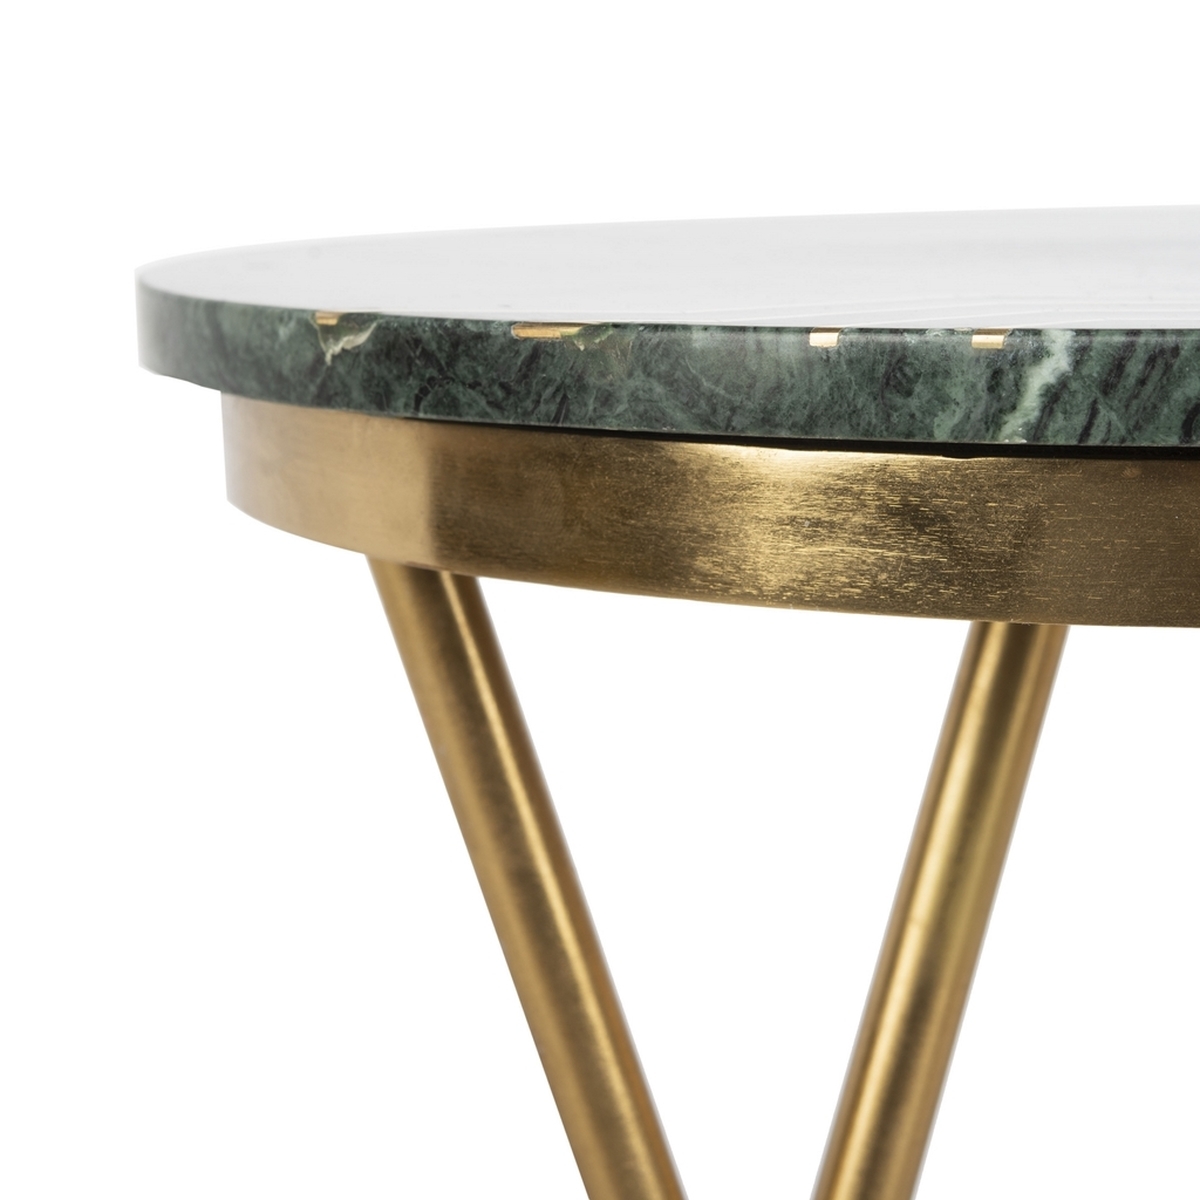 Coletta Round Marble Accent Table - Dark Green/Black/Gold - Arlo Home - Image 6